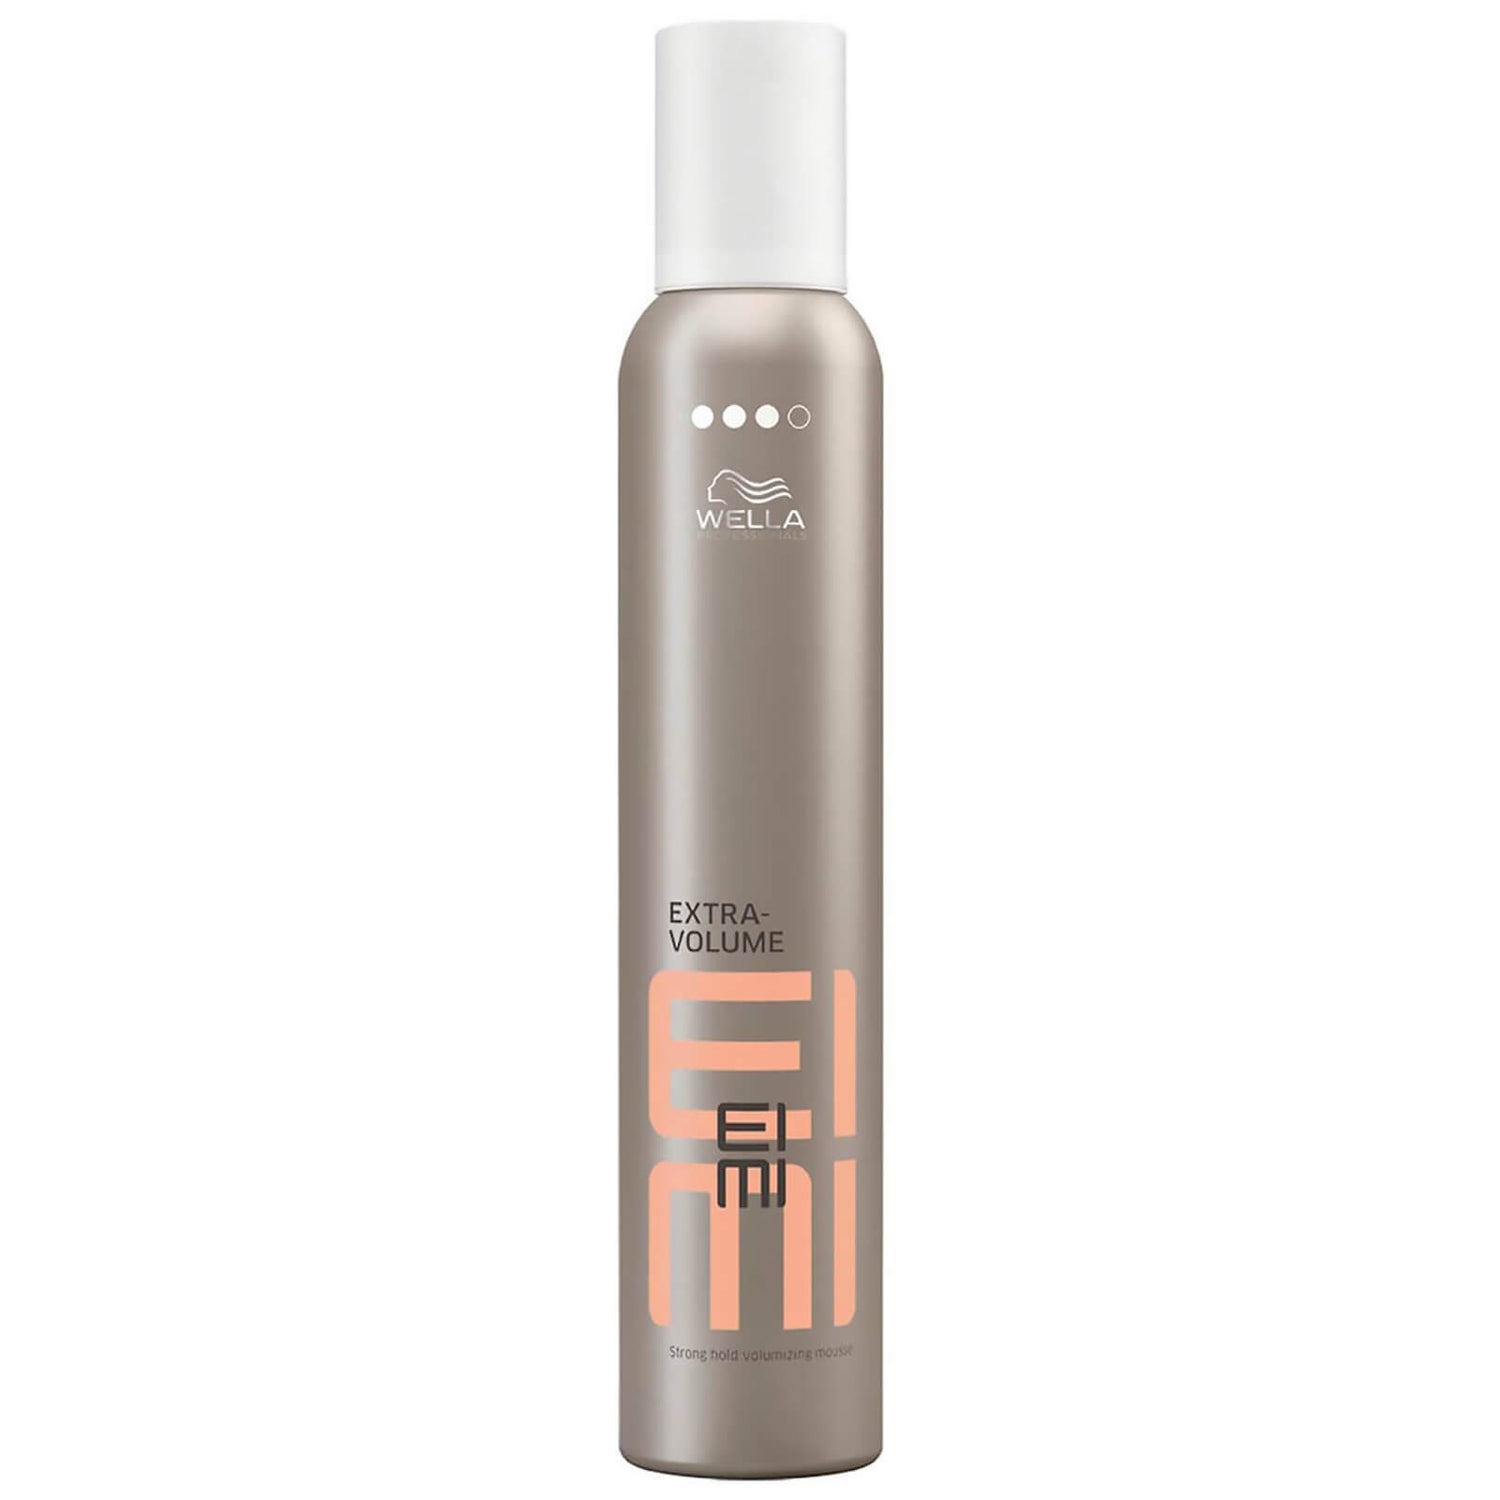 Wella Professionals Wet Extra Volume Styling Mousse (300ml)